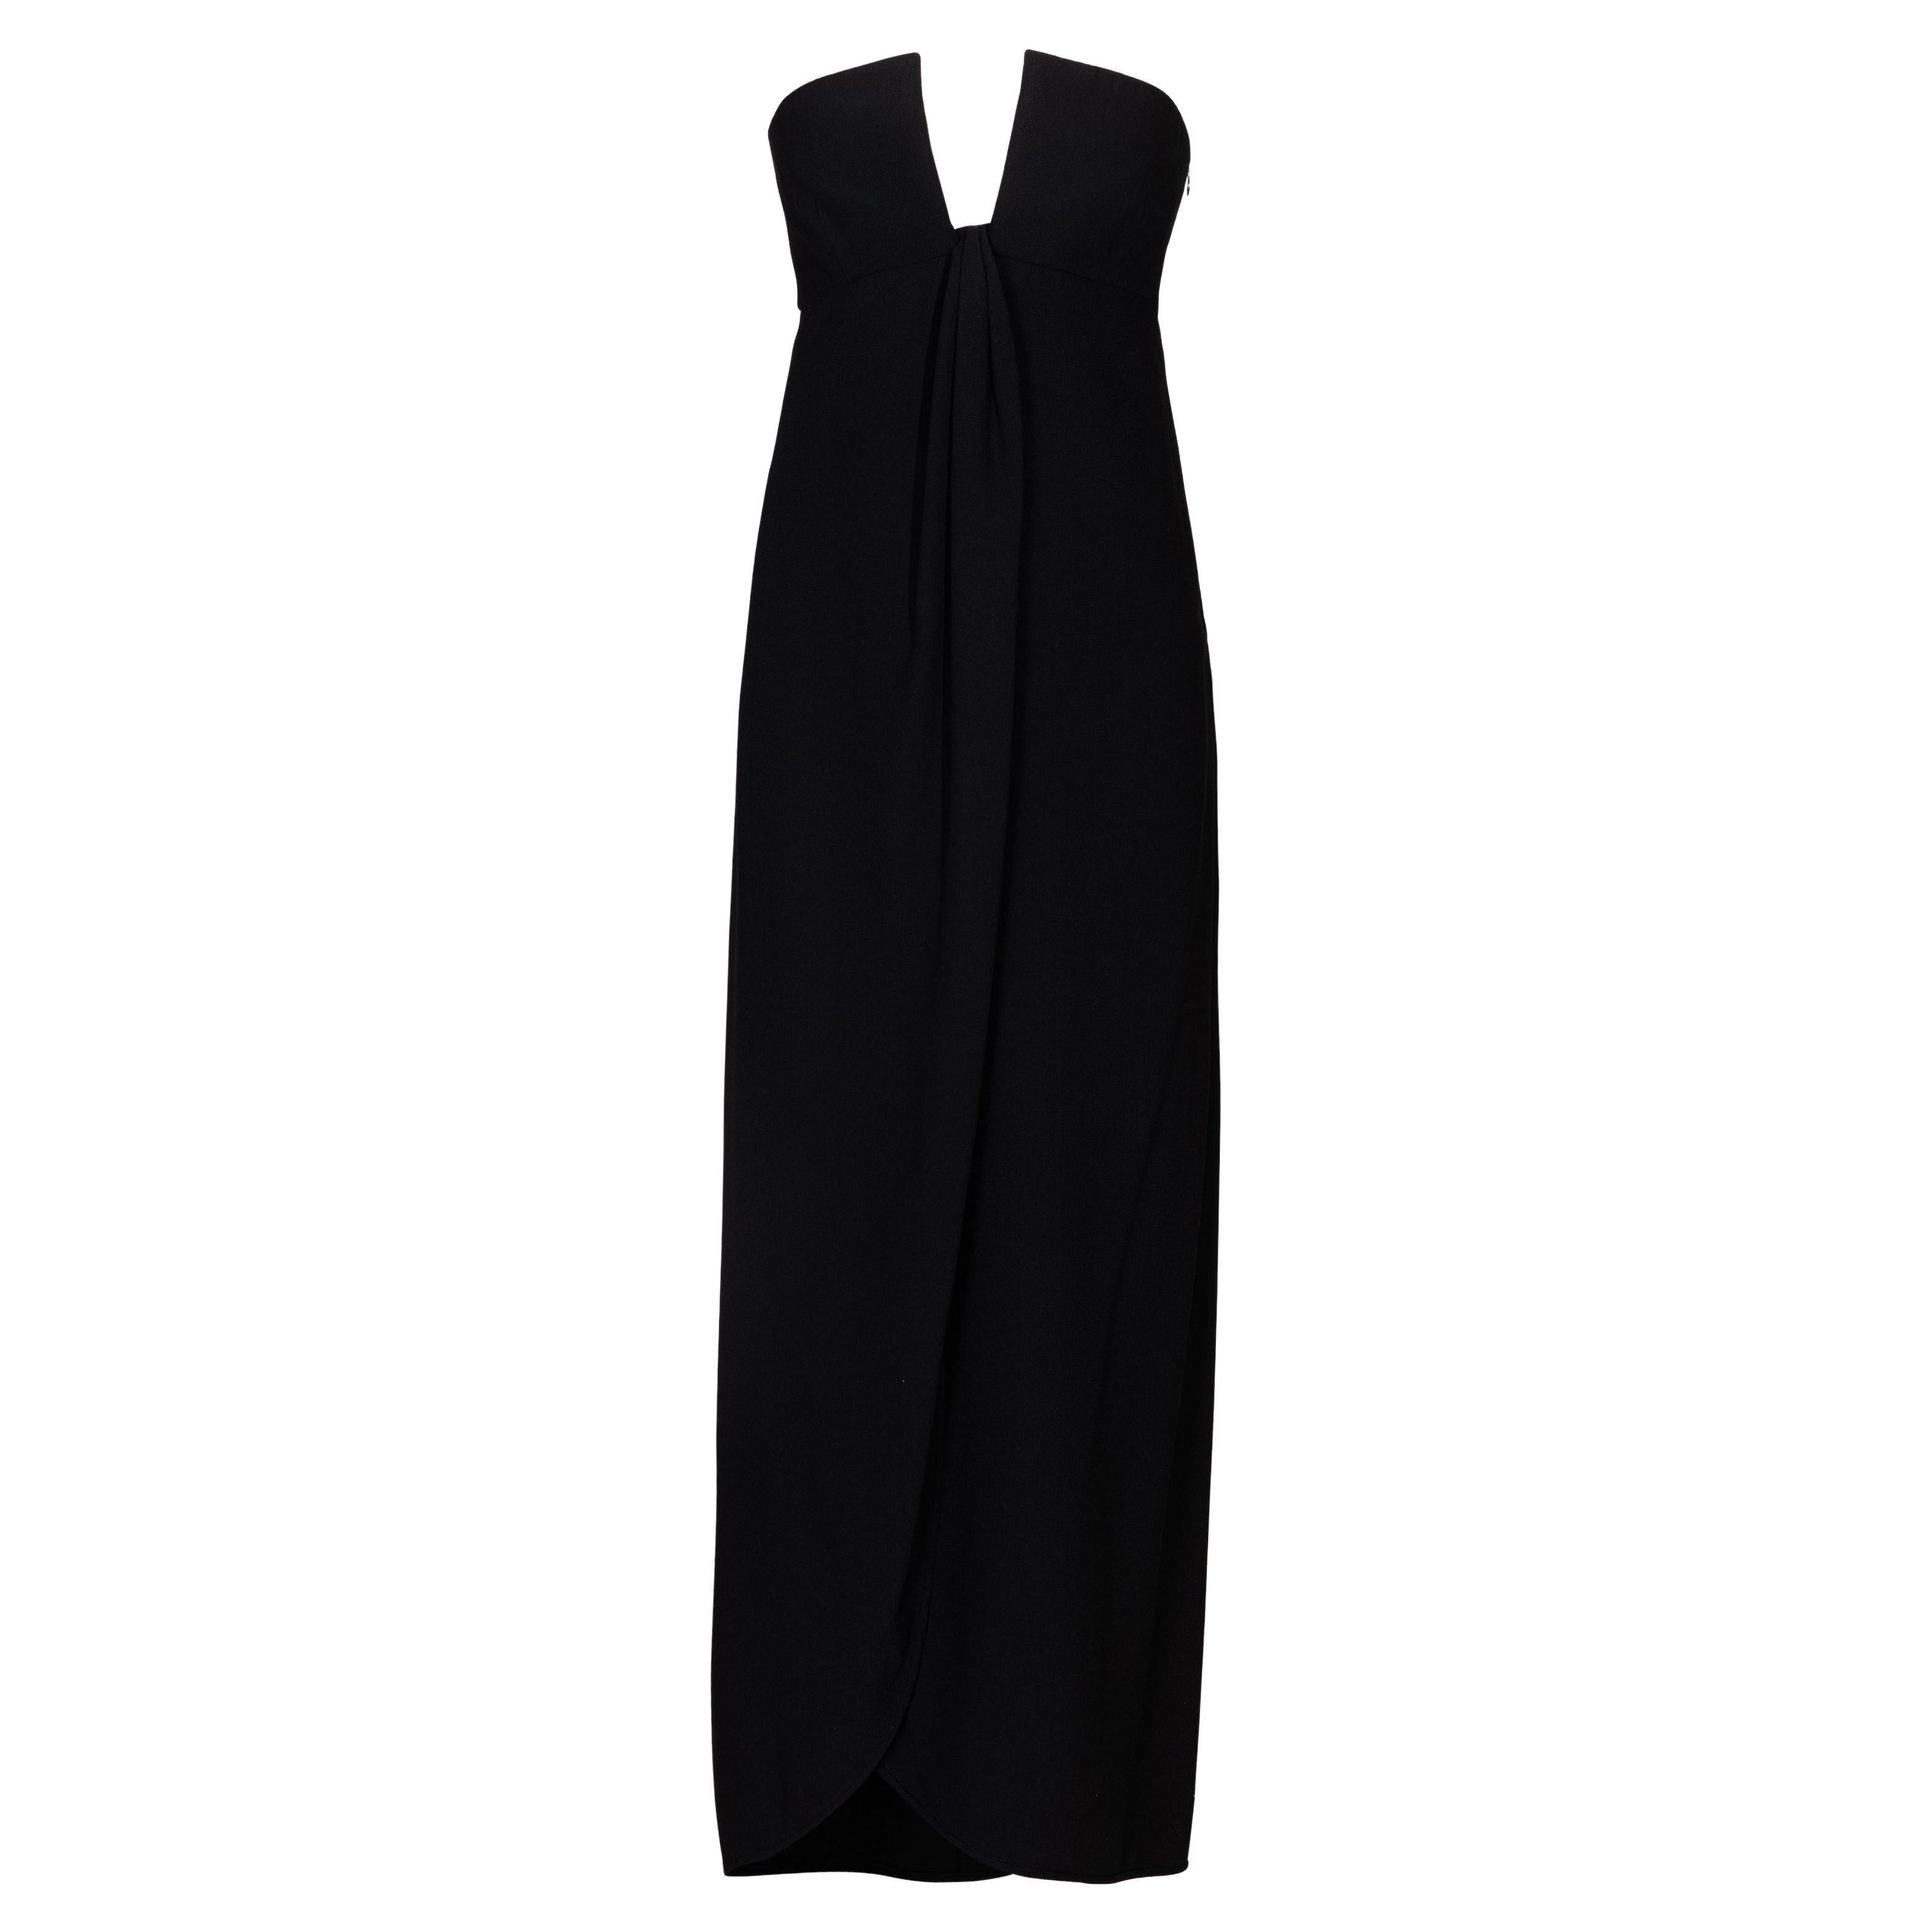 S/S 2000 Valentino Black Strapless Gown with Open Bust For Sale